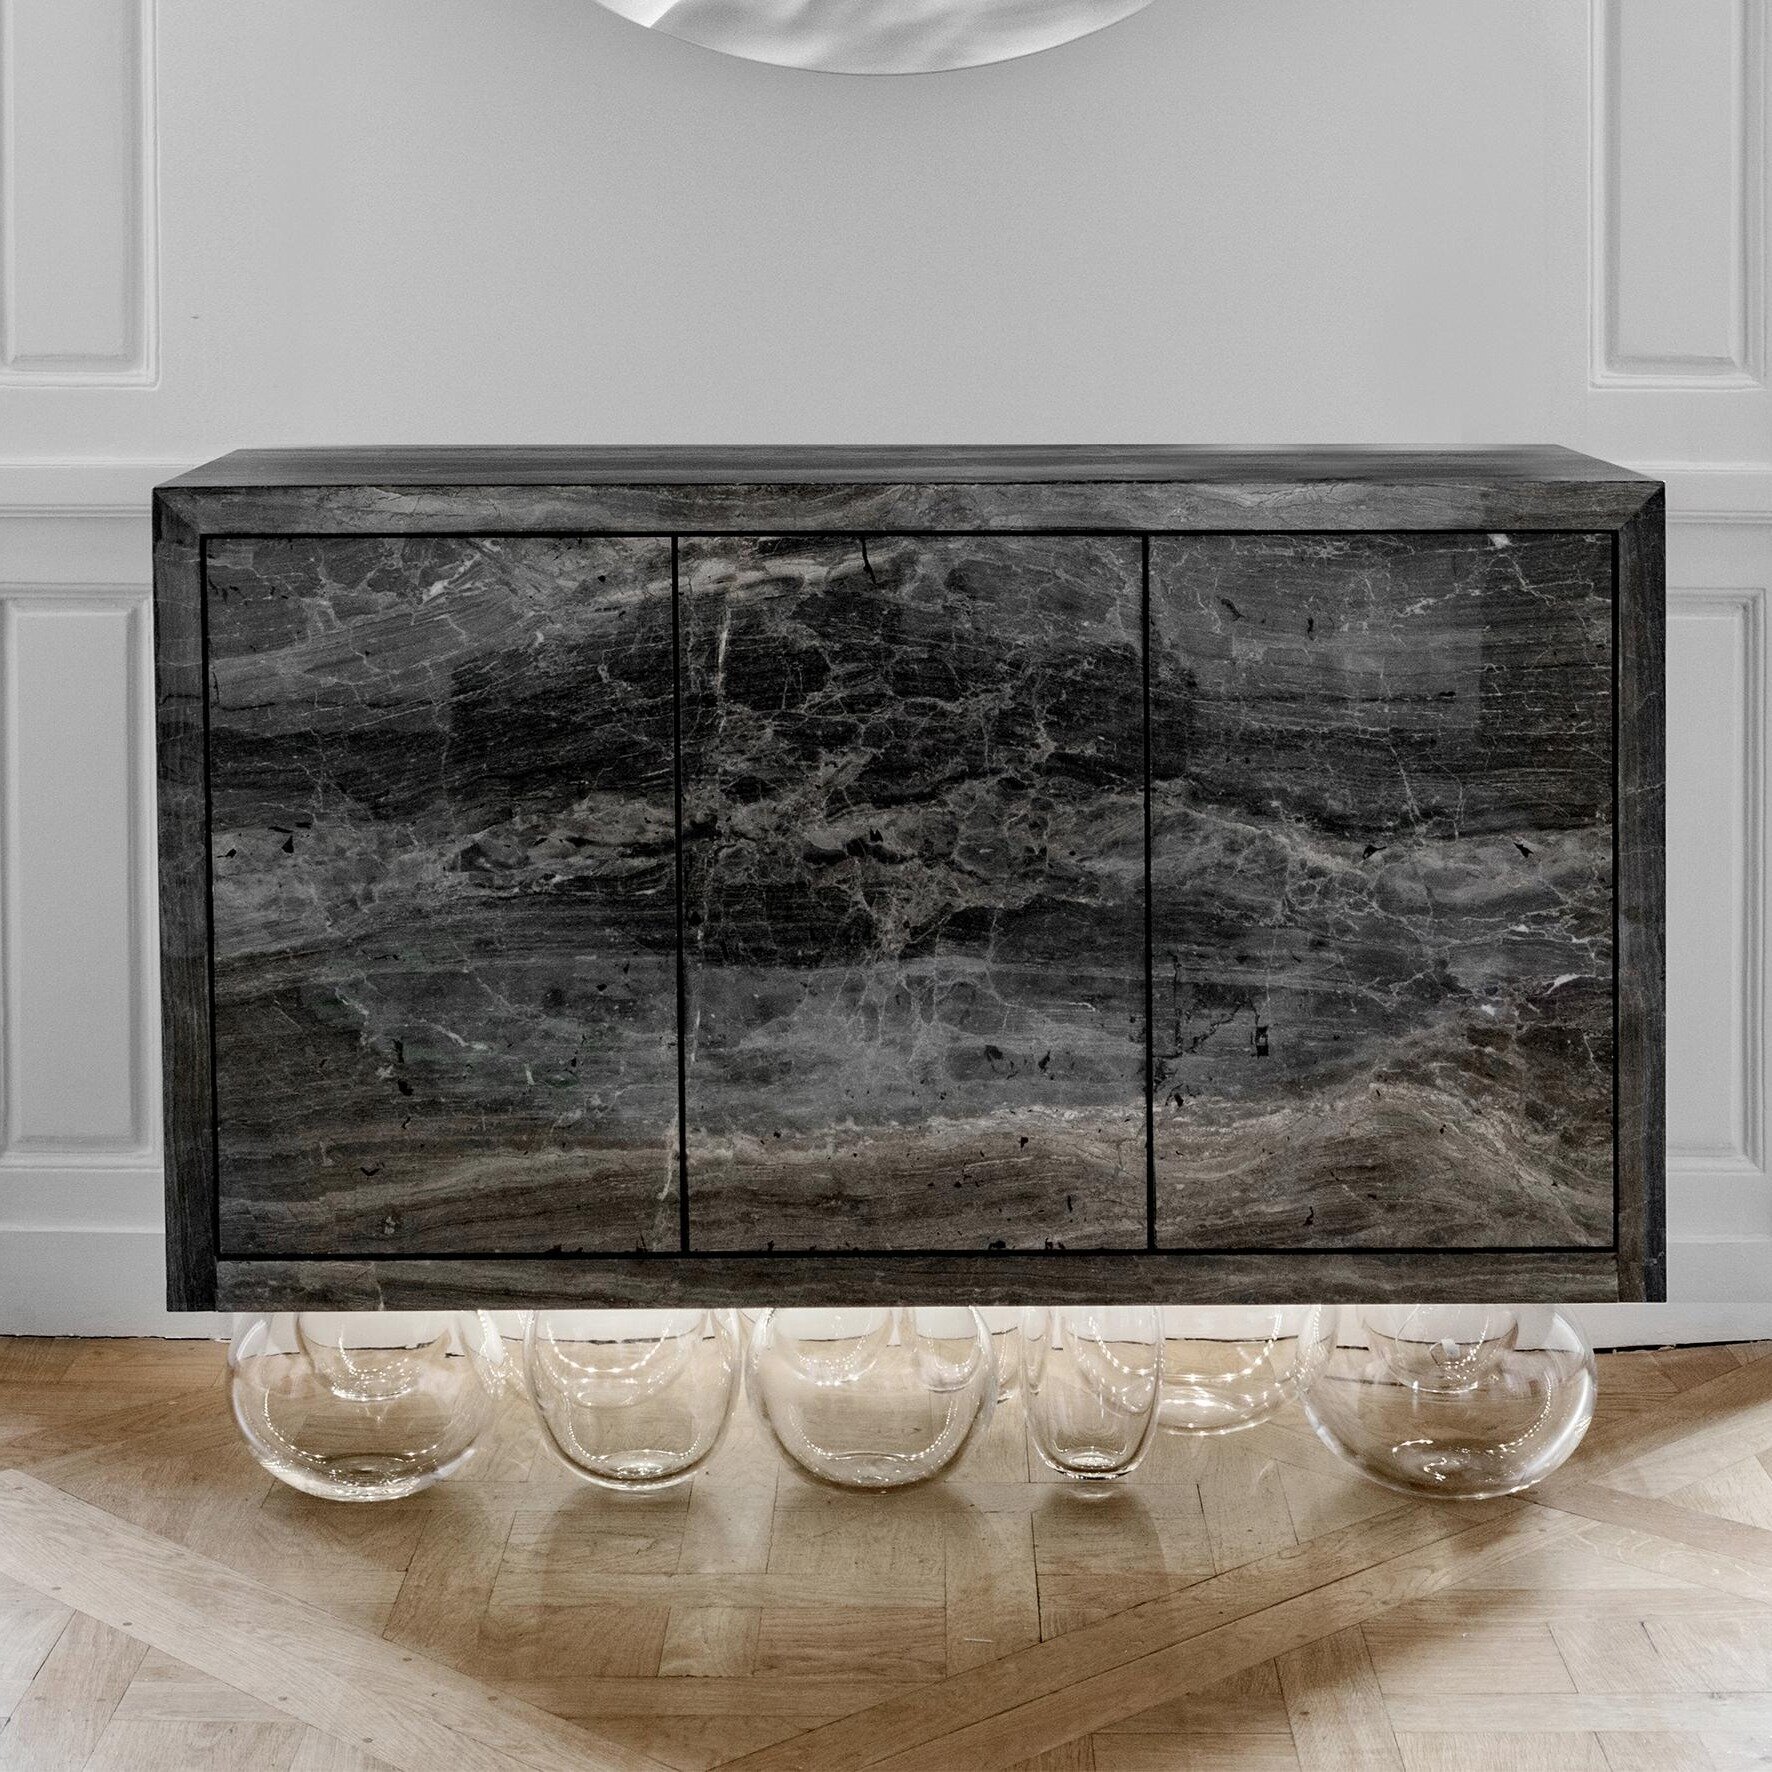 There&rsquo;s an other-worldly feel to Mathieu Lehanneur&rsquo;s Inverted Gravity Collection. Each piece is constructed of marble and onyx placed on blown glass bubbles, an exceptional example of innovative craftsmanship. 

@mathieulehanneur 

#furni